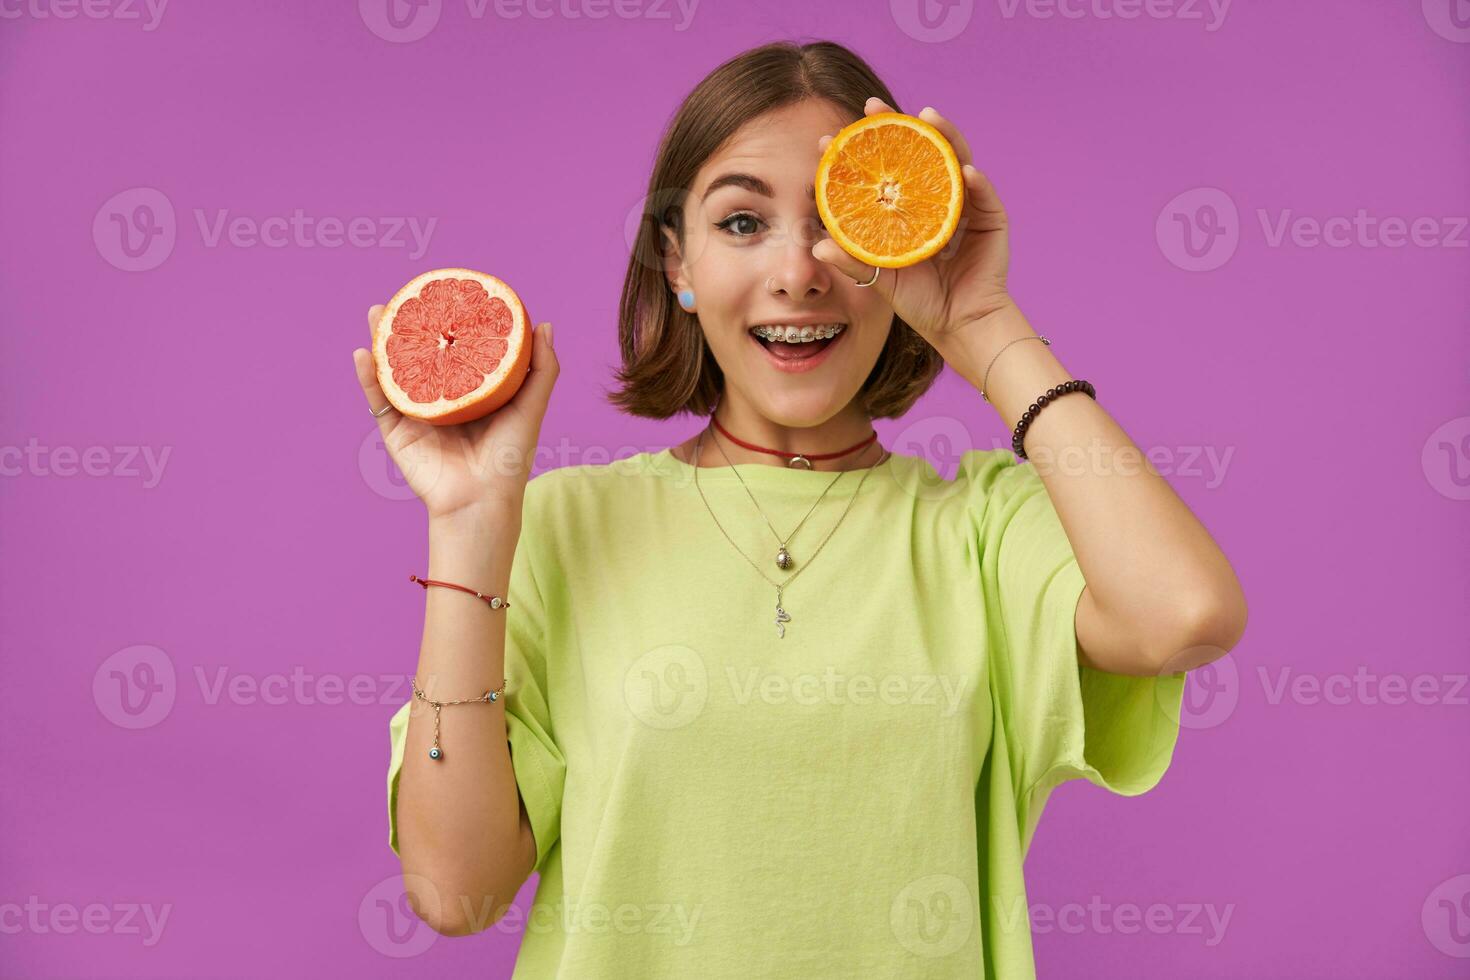 Female student, young surprised lady with short brunette hair. Holding orange over her eye, cover one eye. Standing over purple background. Wearing green t-shirt, necklace, braces and bracelets photo